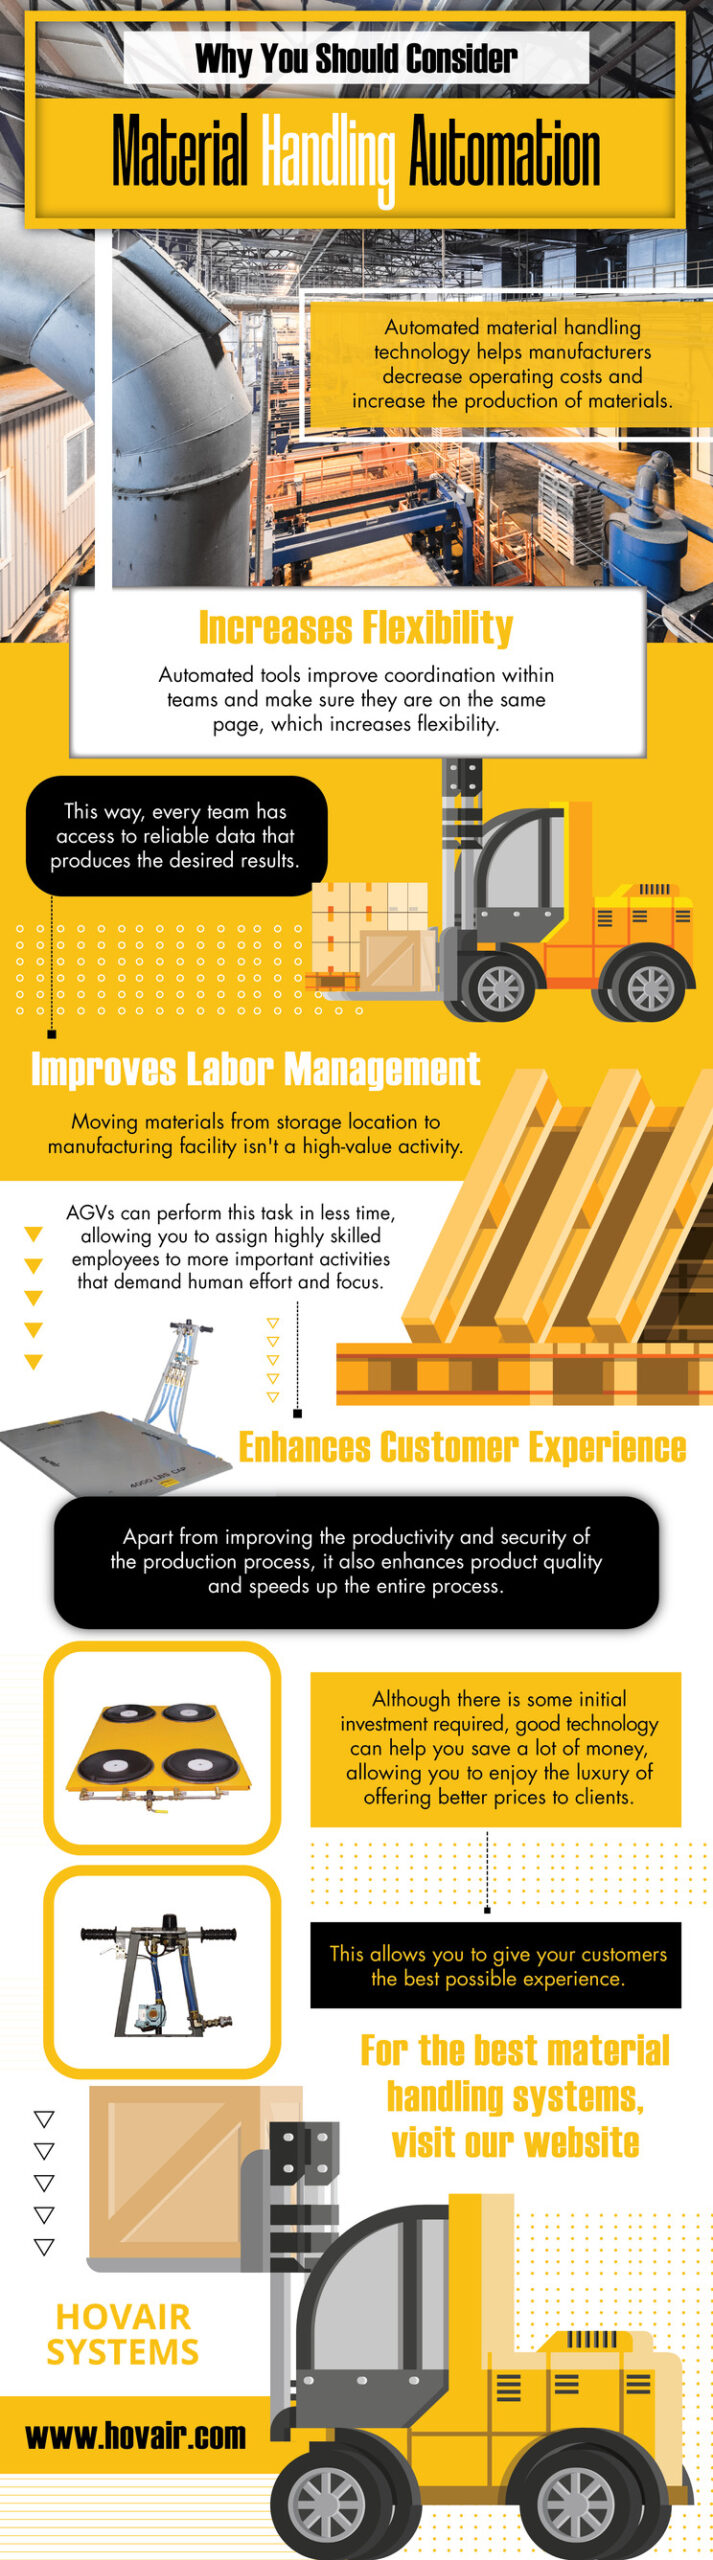 Why You Should Consider Material Handling Automation